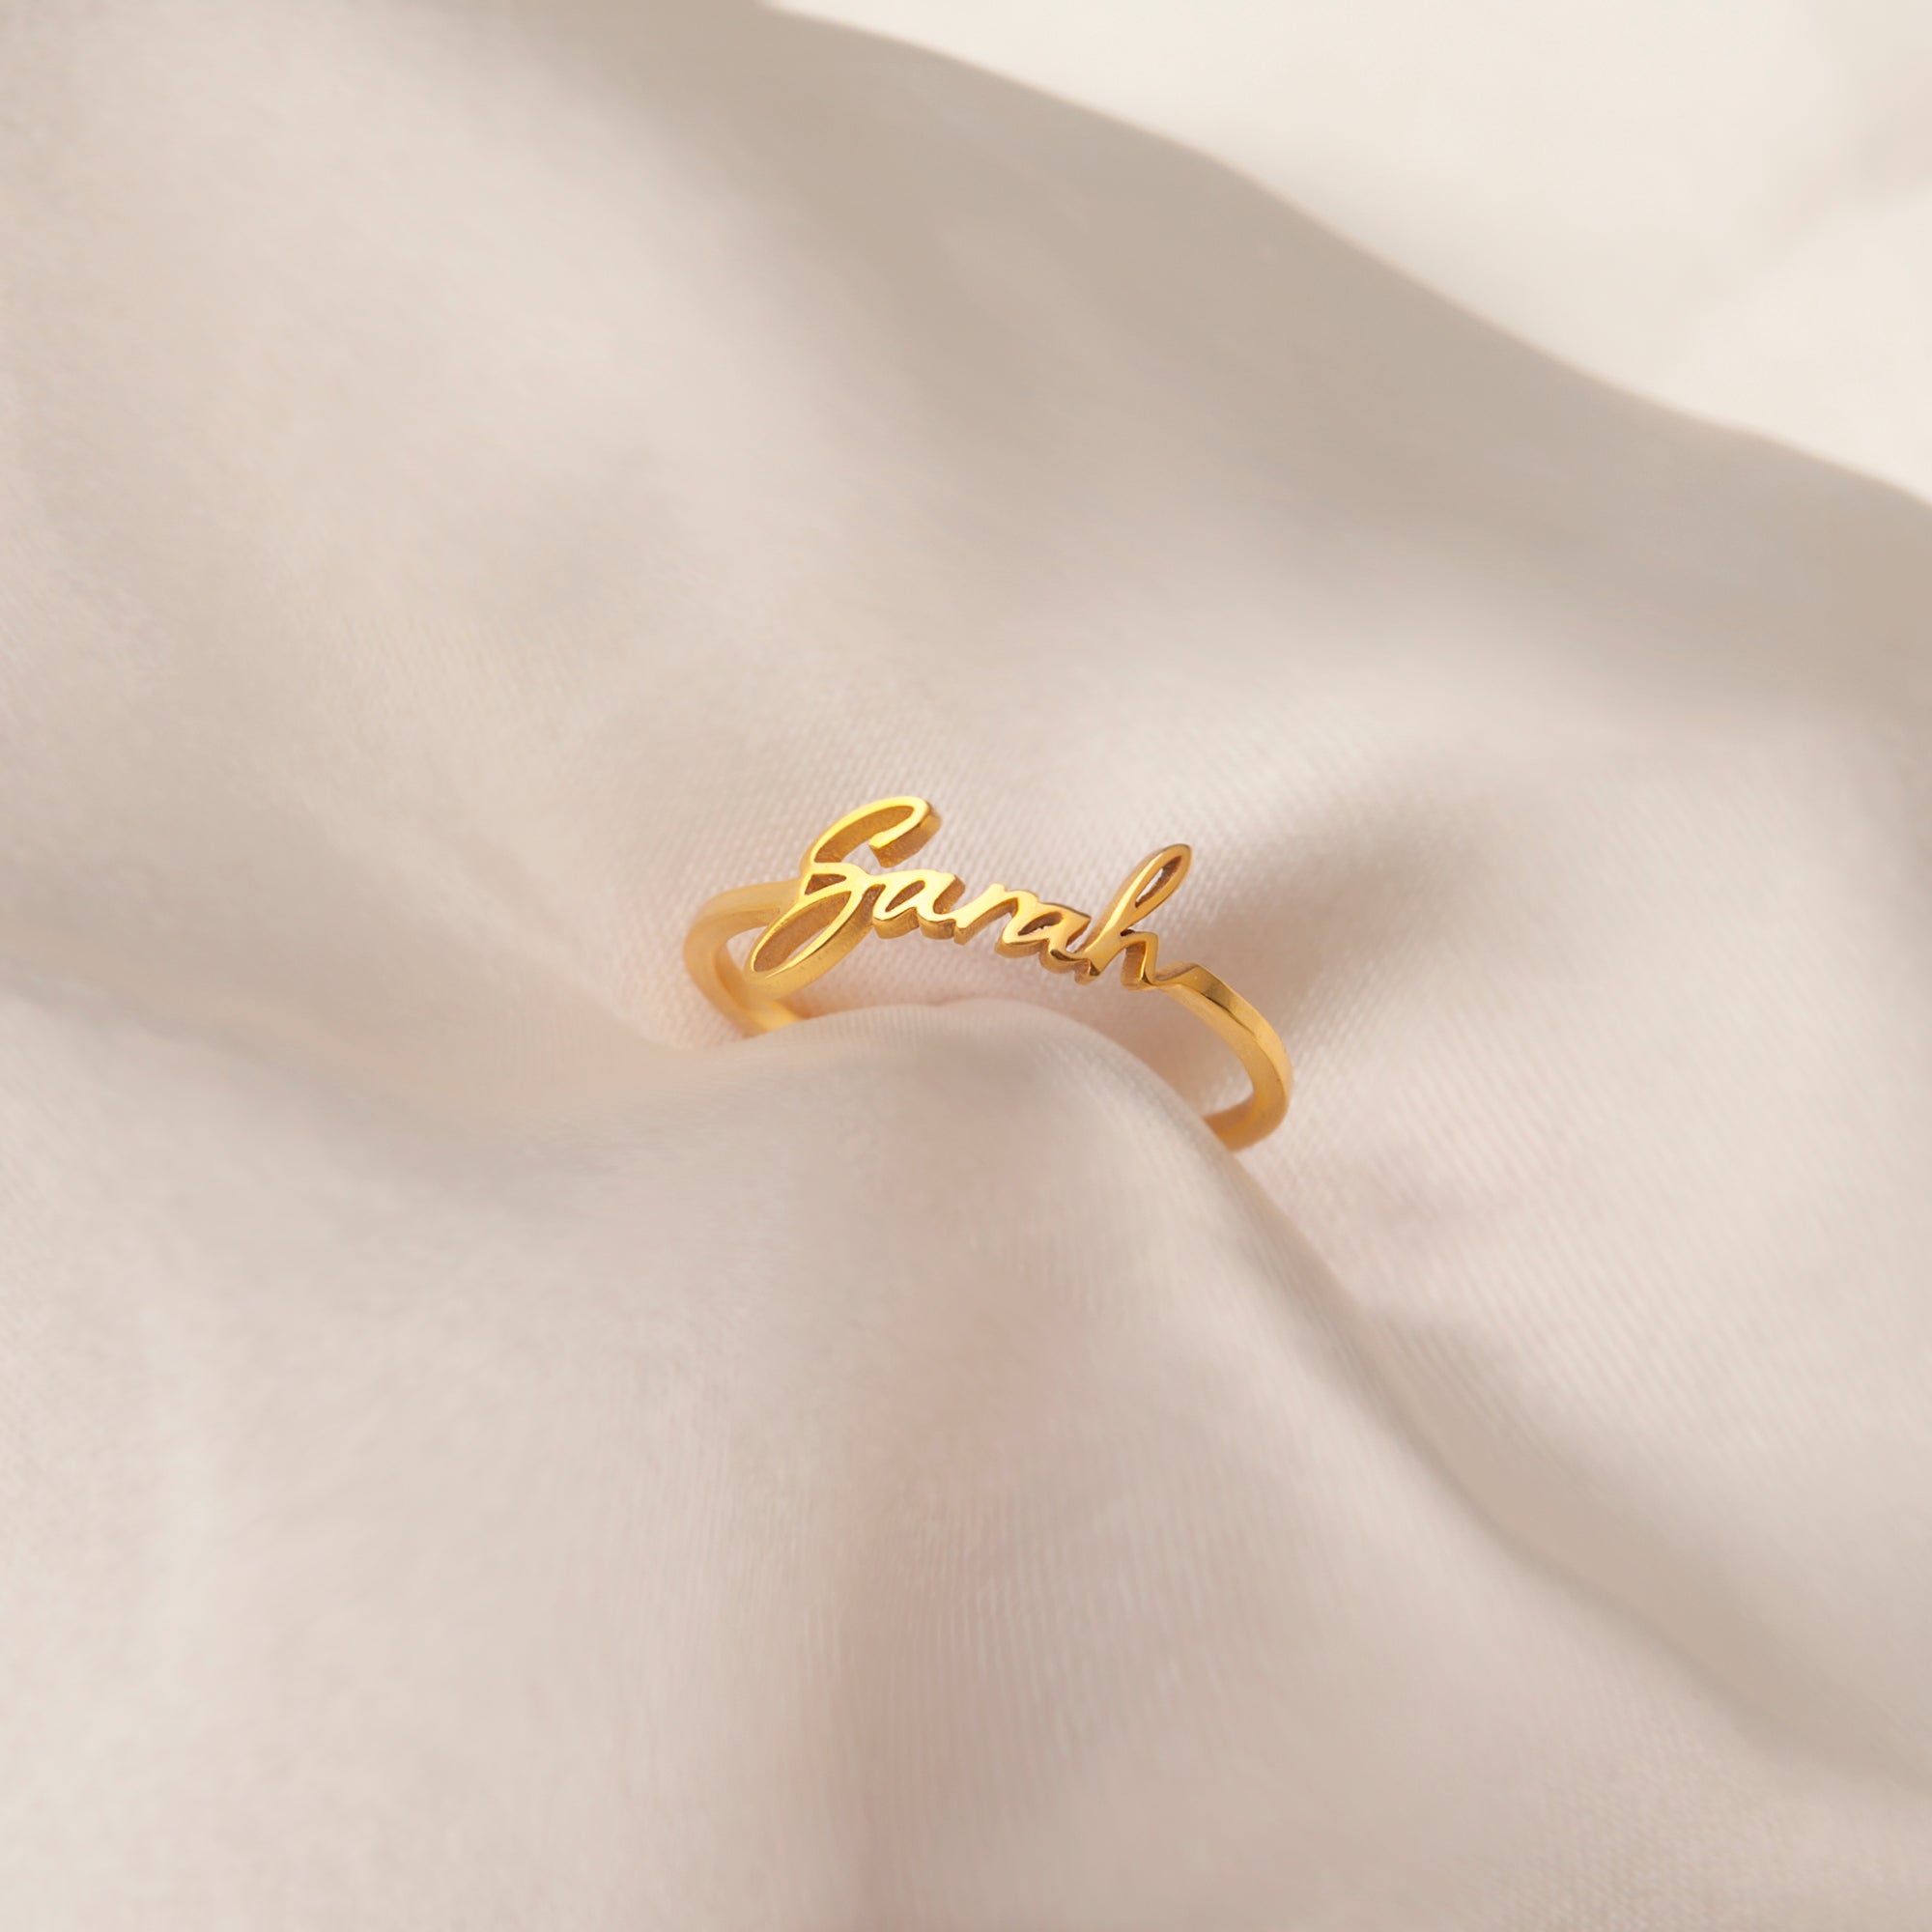 Double Name Ring Two Name Ring in Sterling Silver, Gold and Rose Gold  Personalized Gift for Mom Best Friend Gift RM75F68 - Etsy | Name rings,  Personalized gifts for mom, Custom jewelry